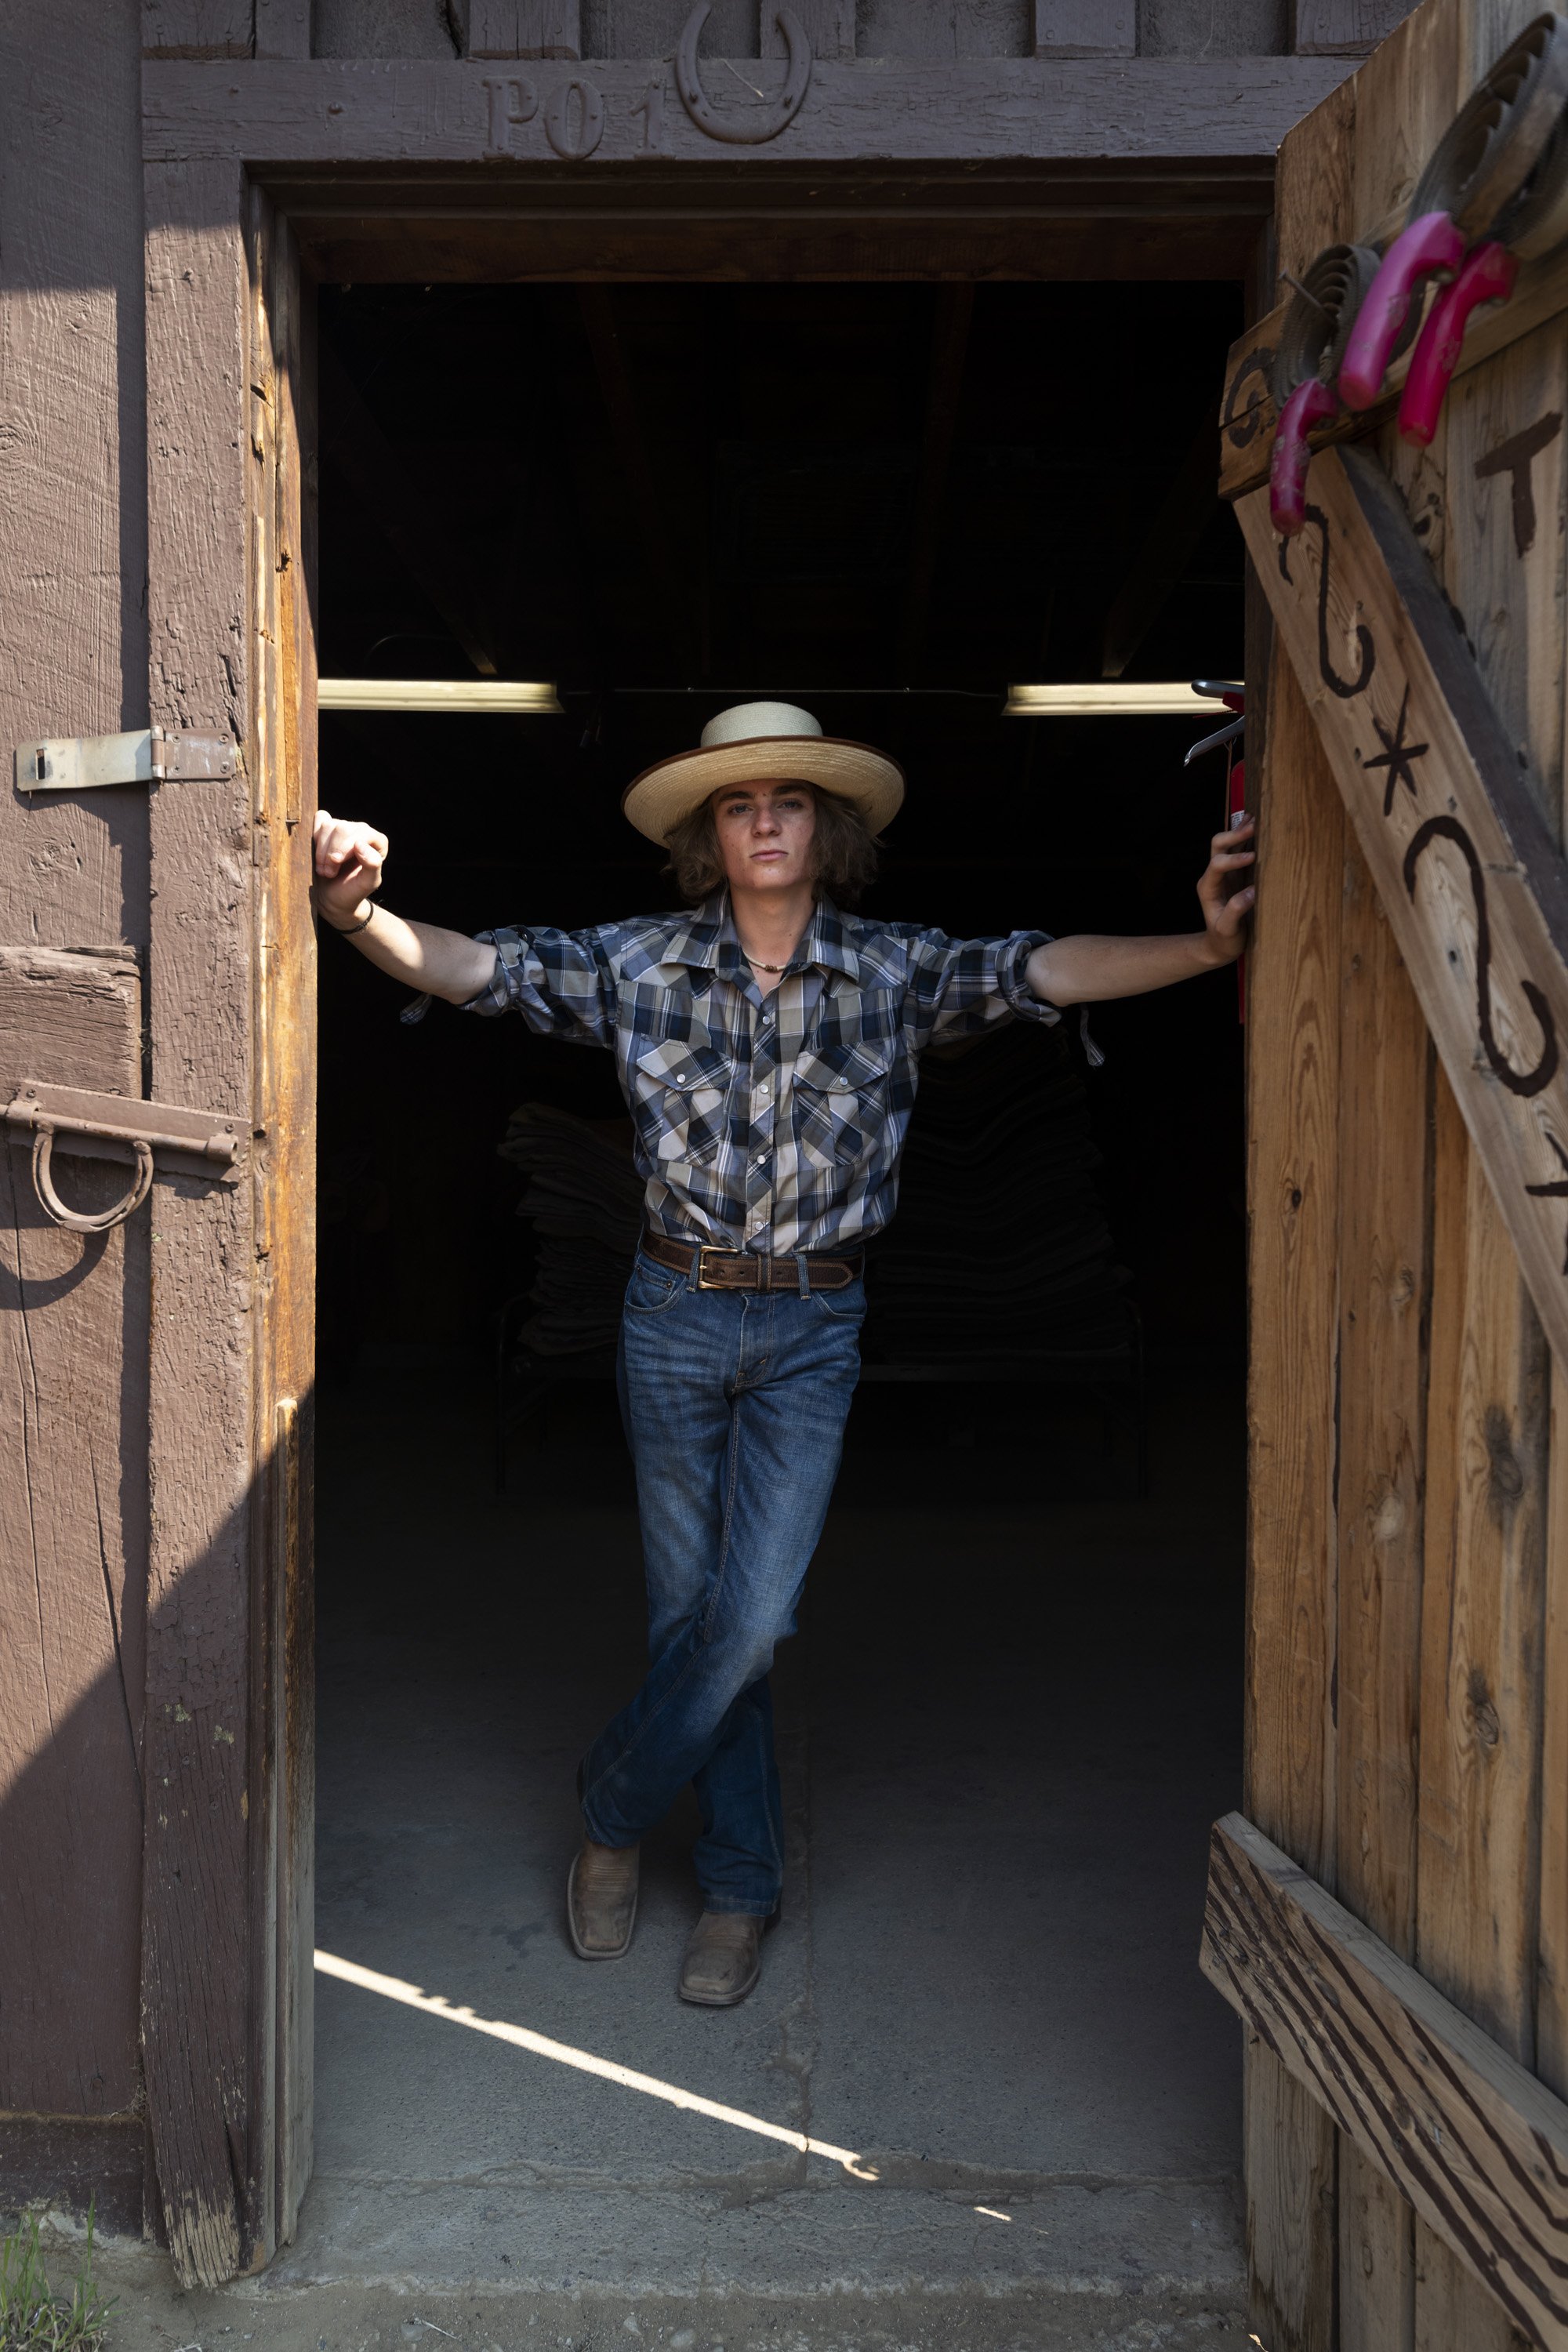  Patrick Smith poses for a portrait in the barn at Ponil on Philmont Scout Ranch on June 13, 2021. Smith works as a wrangler caring for the cattle that live on the ranch and teaching scouts how to ride horses and pack burros.  